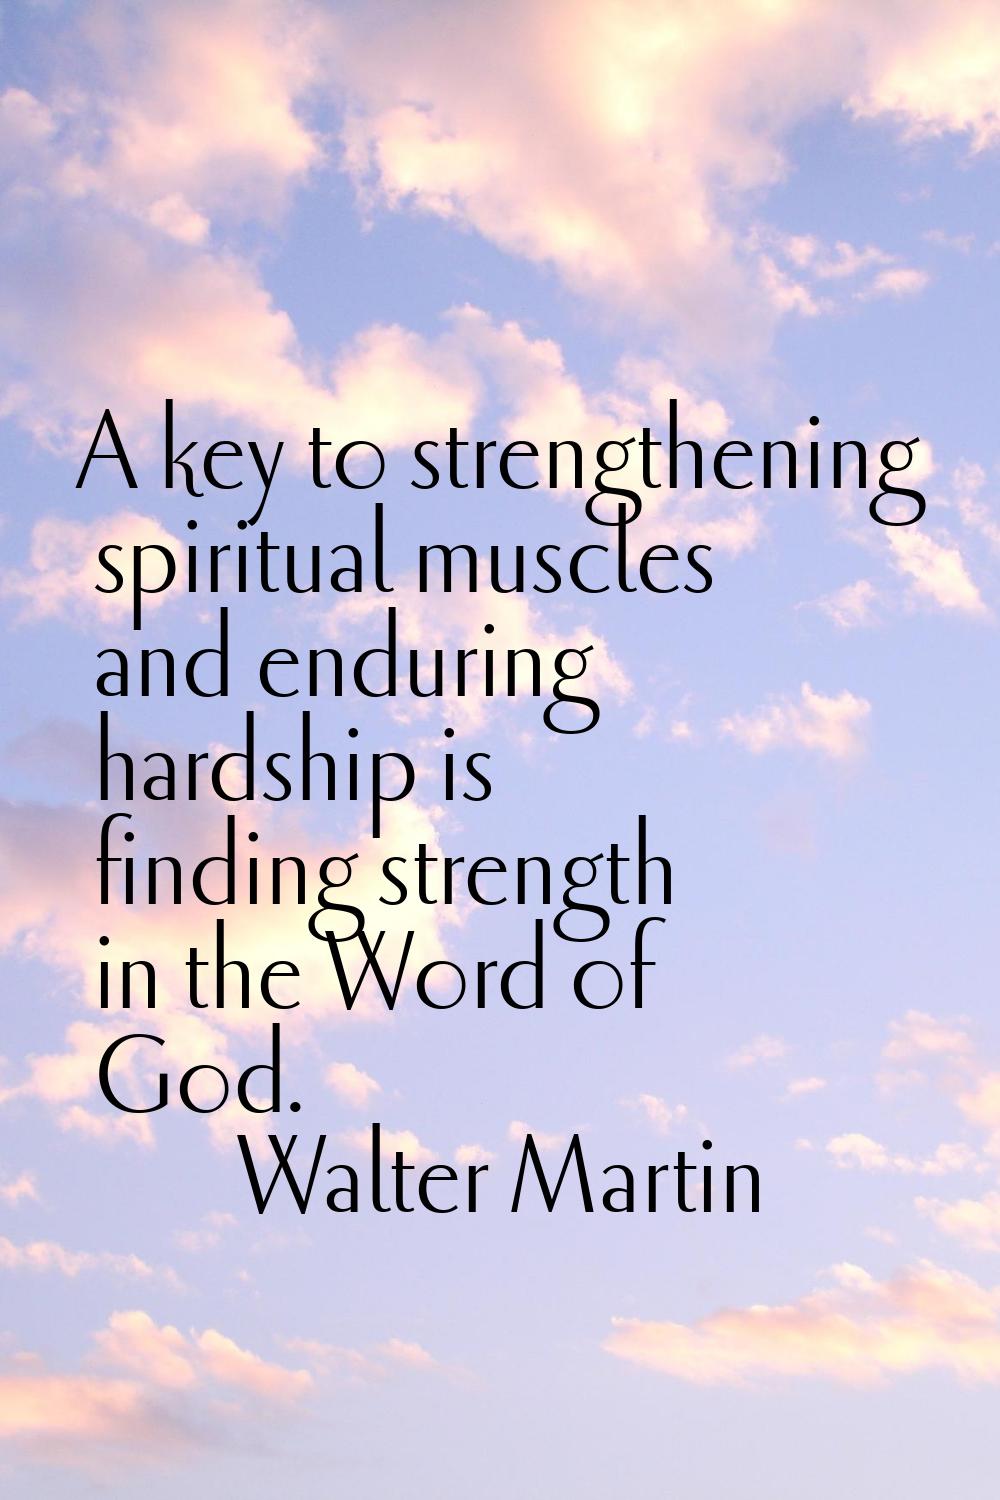 A key to strengthening spiritual muscles and enduring hardship is finding strength in the Word of G